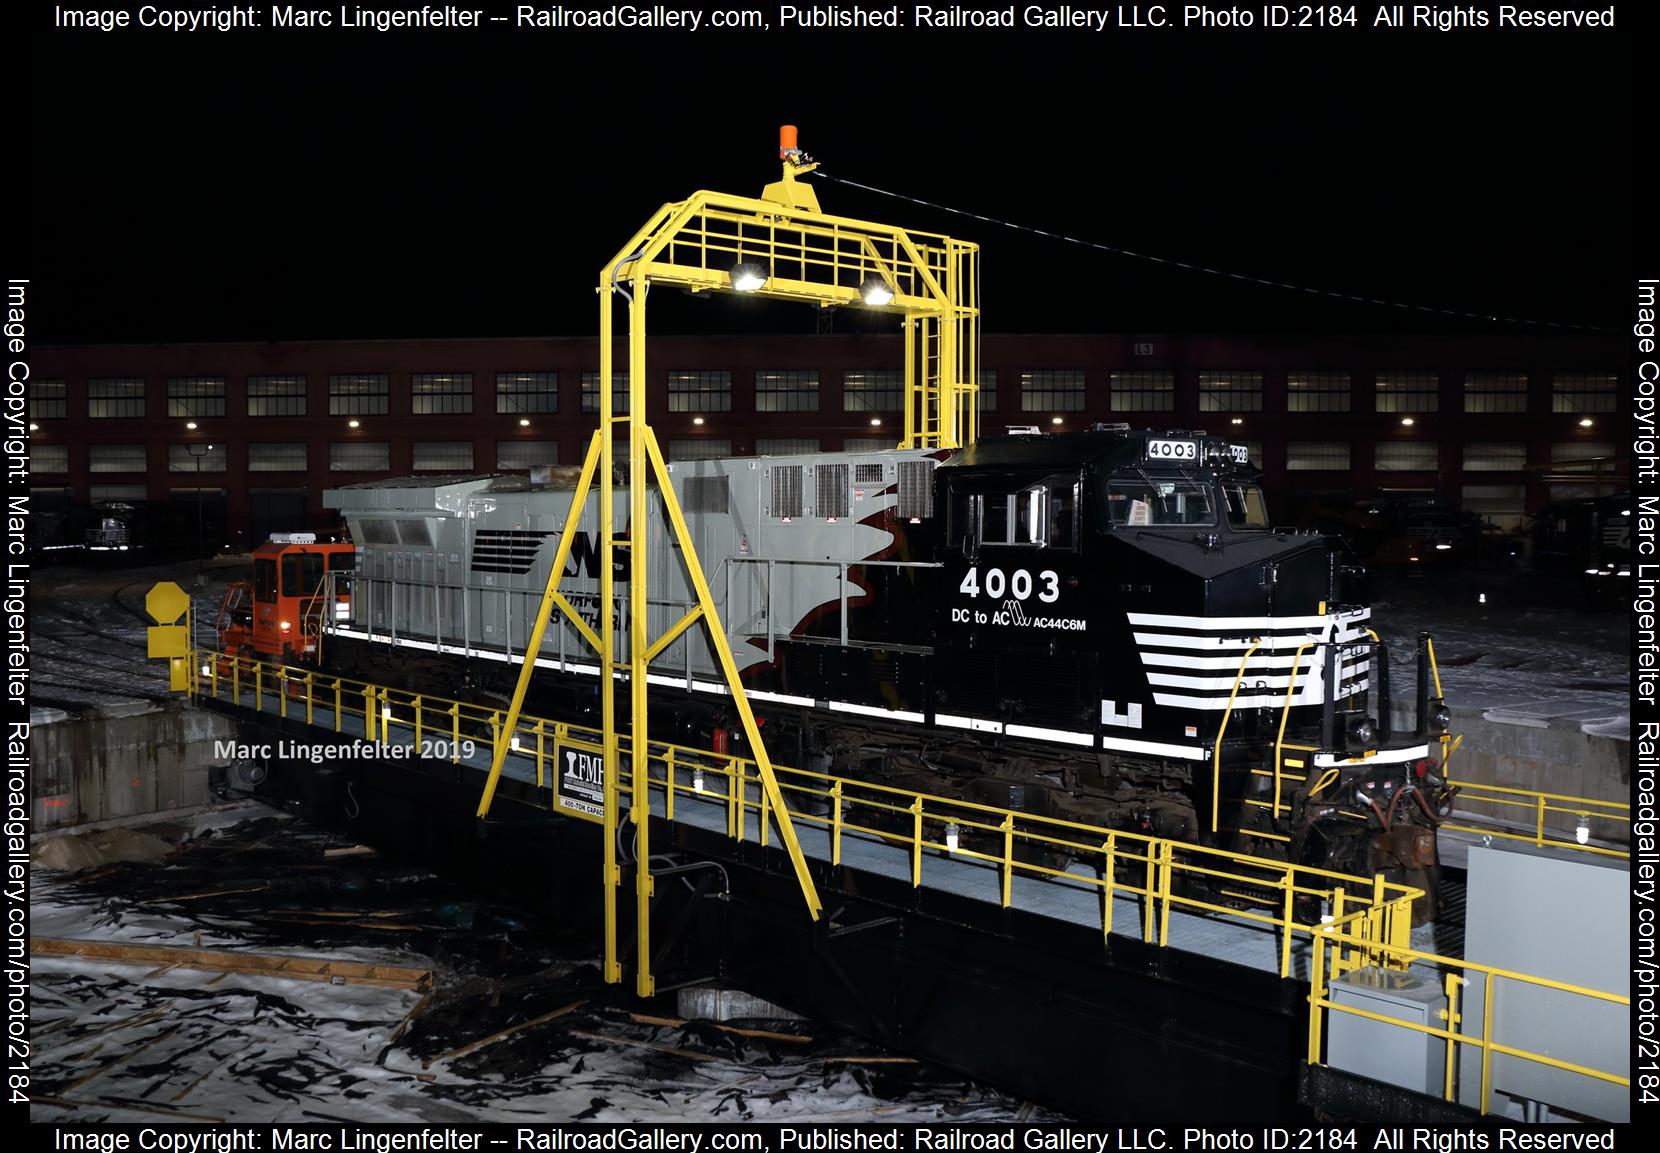 NS 4003 is a class NS AC44C6M and  is pictured in Altoona, Pennsylvania, USA.  This was taken along the NS Pittsburgh Line on the Norfolk Southern. Photo Copyright: Marc Lingenfelter uploaded to Railroad Gallery on 07/02/2023. This photograph of NS 4003 was taken on Saturday, February 02, 2019. All Rights Reserved. 